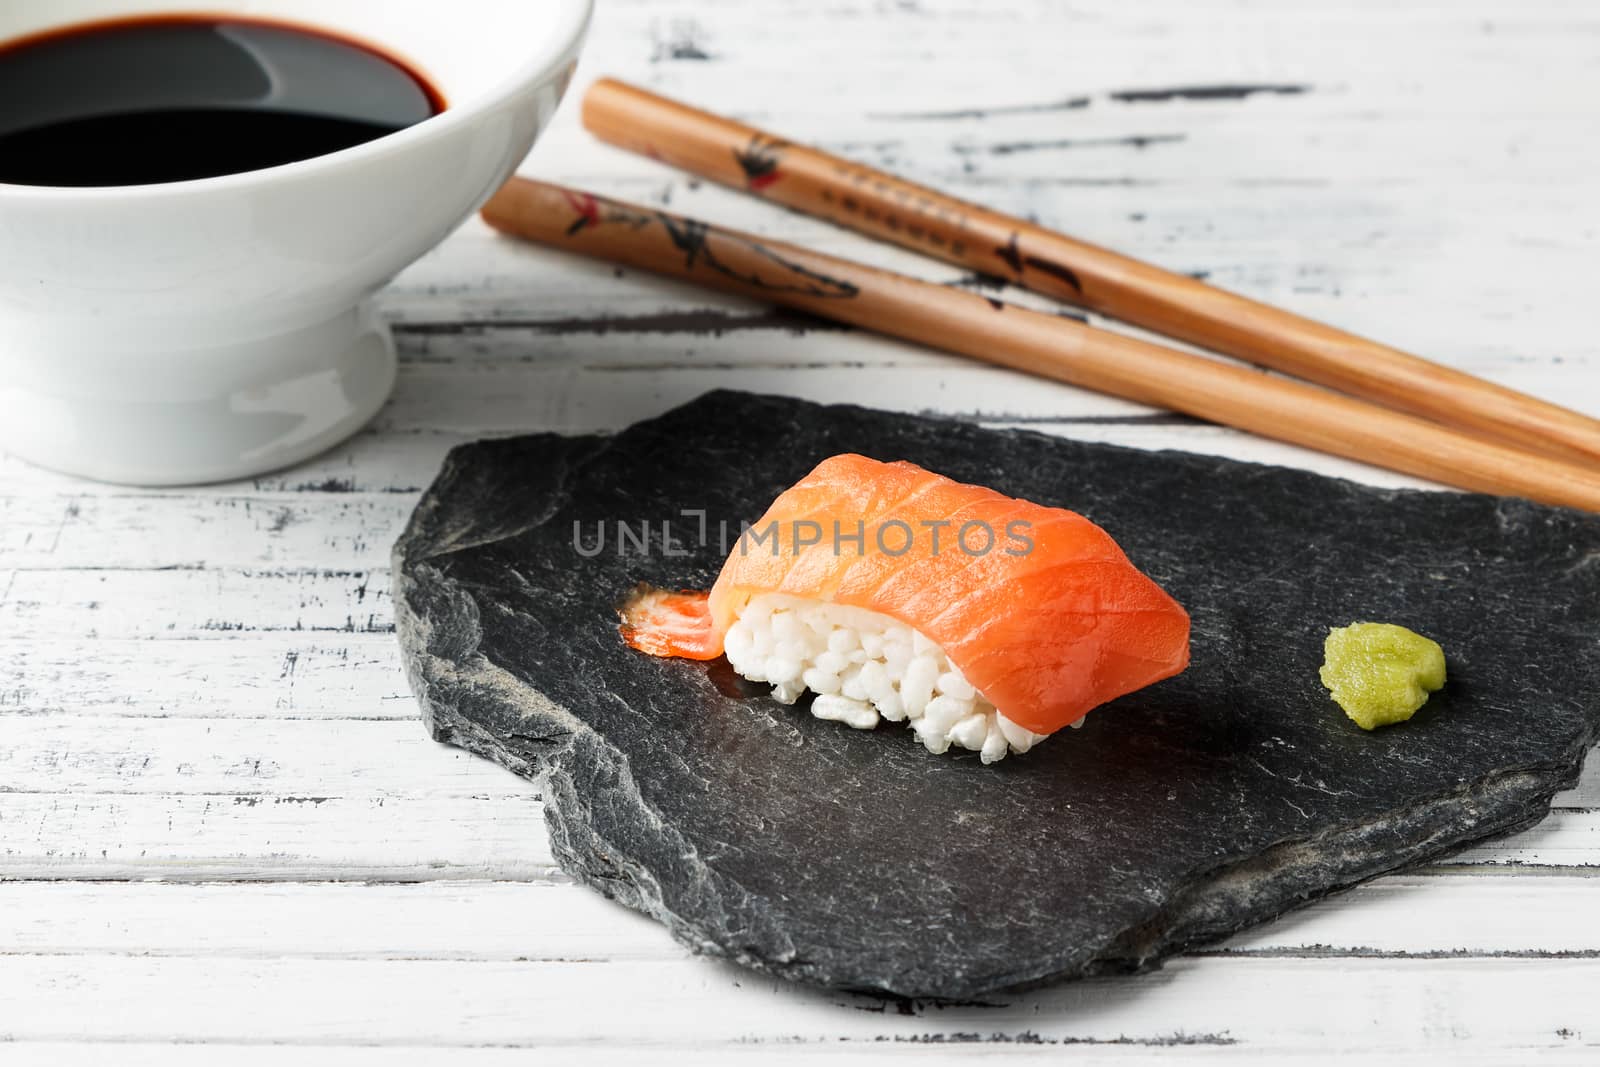 Smoked salmon Nigiri with wasabi paste on slate stone. Chopsticks and bowl with soy sauce in the background on old white wood. Raw fish in traditional Japanese sushi style. Horizontal image.